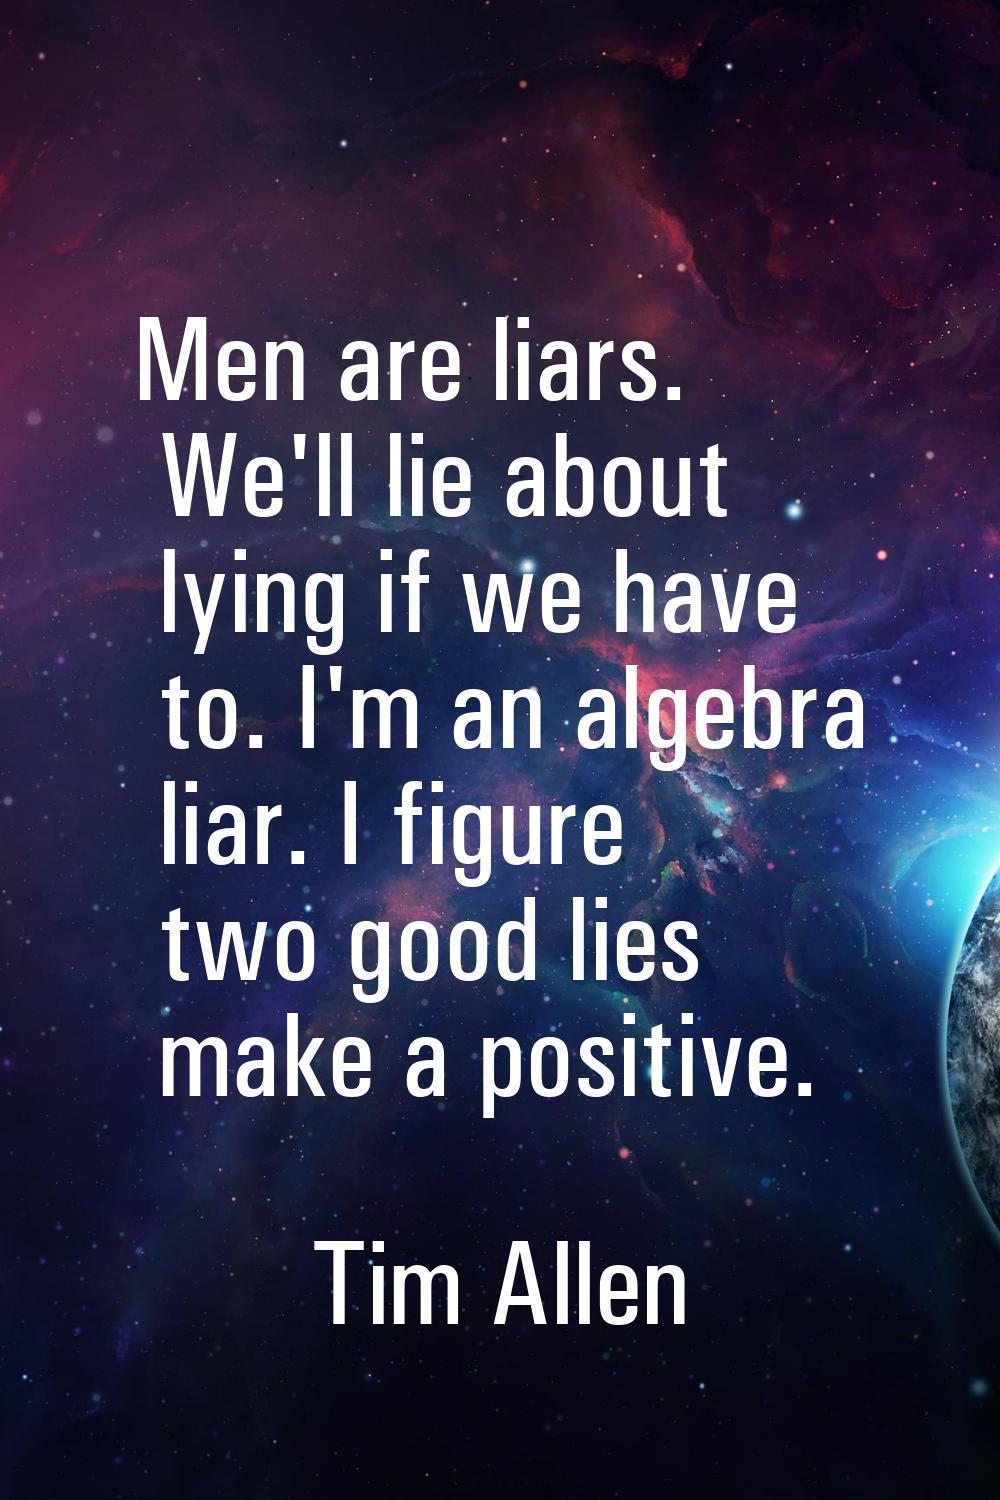 Men are liars. We'll lie about lying if we have to. I'm an algebra liar. I figure two good lies mak